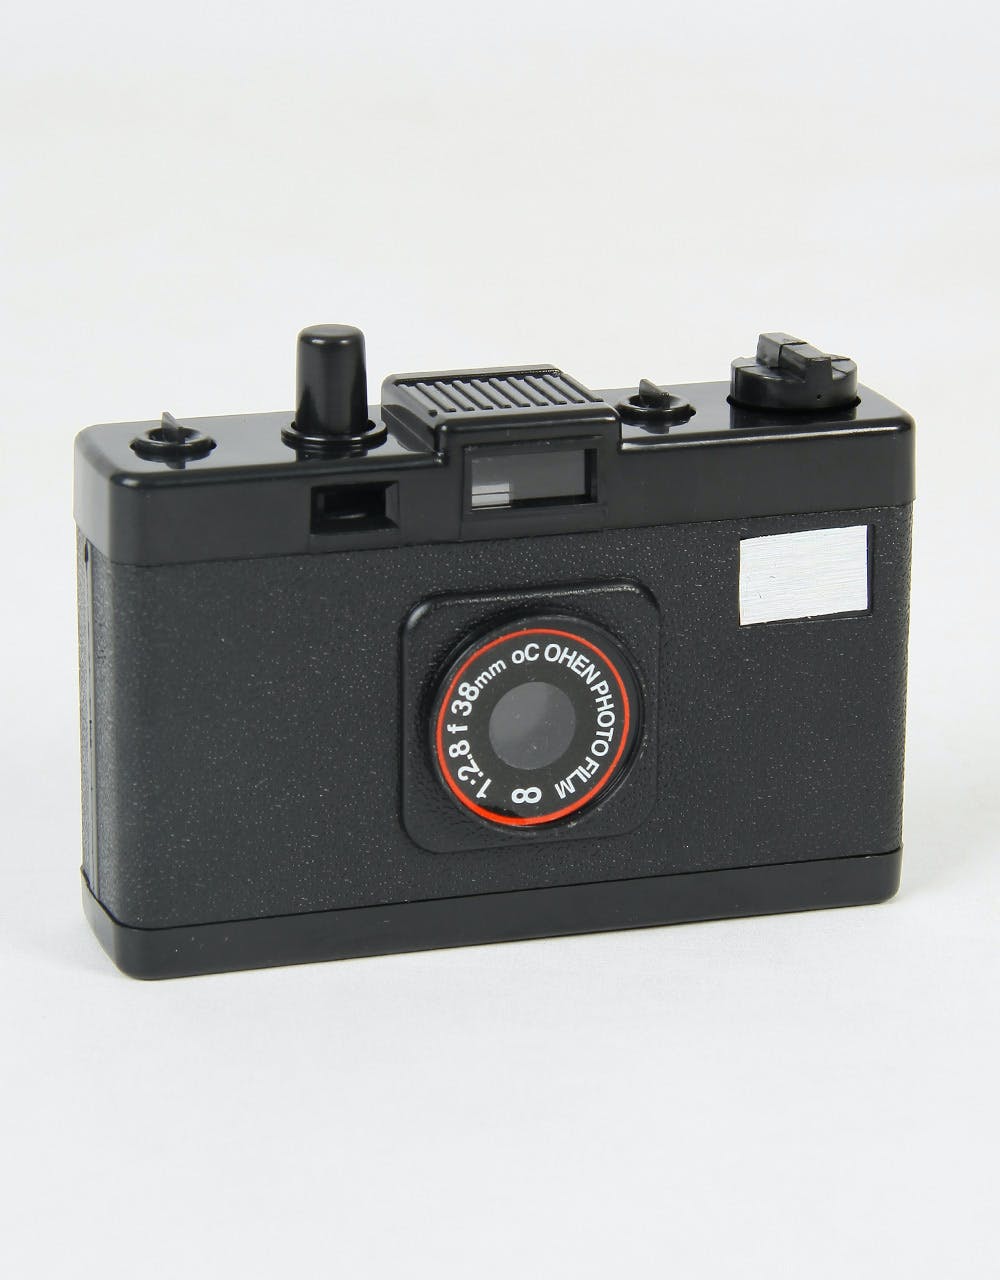 NPW Squirt Camera